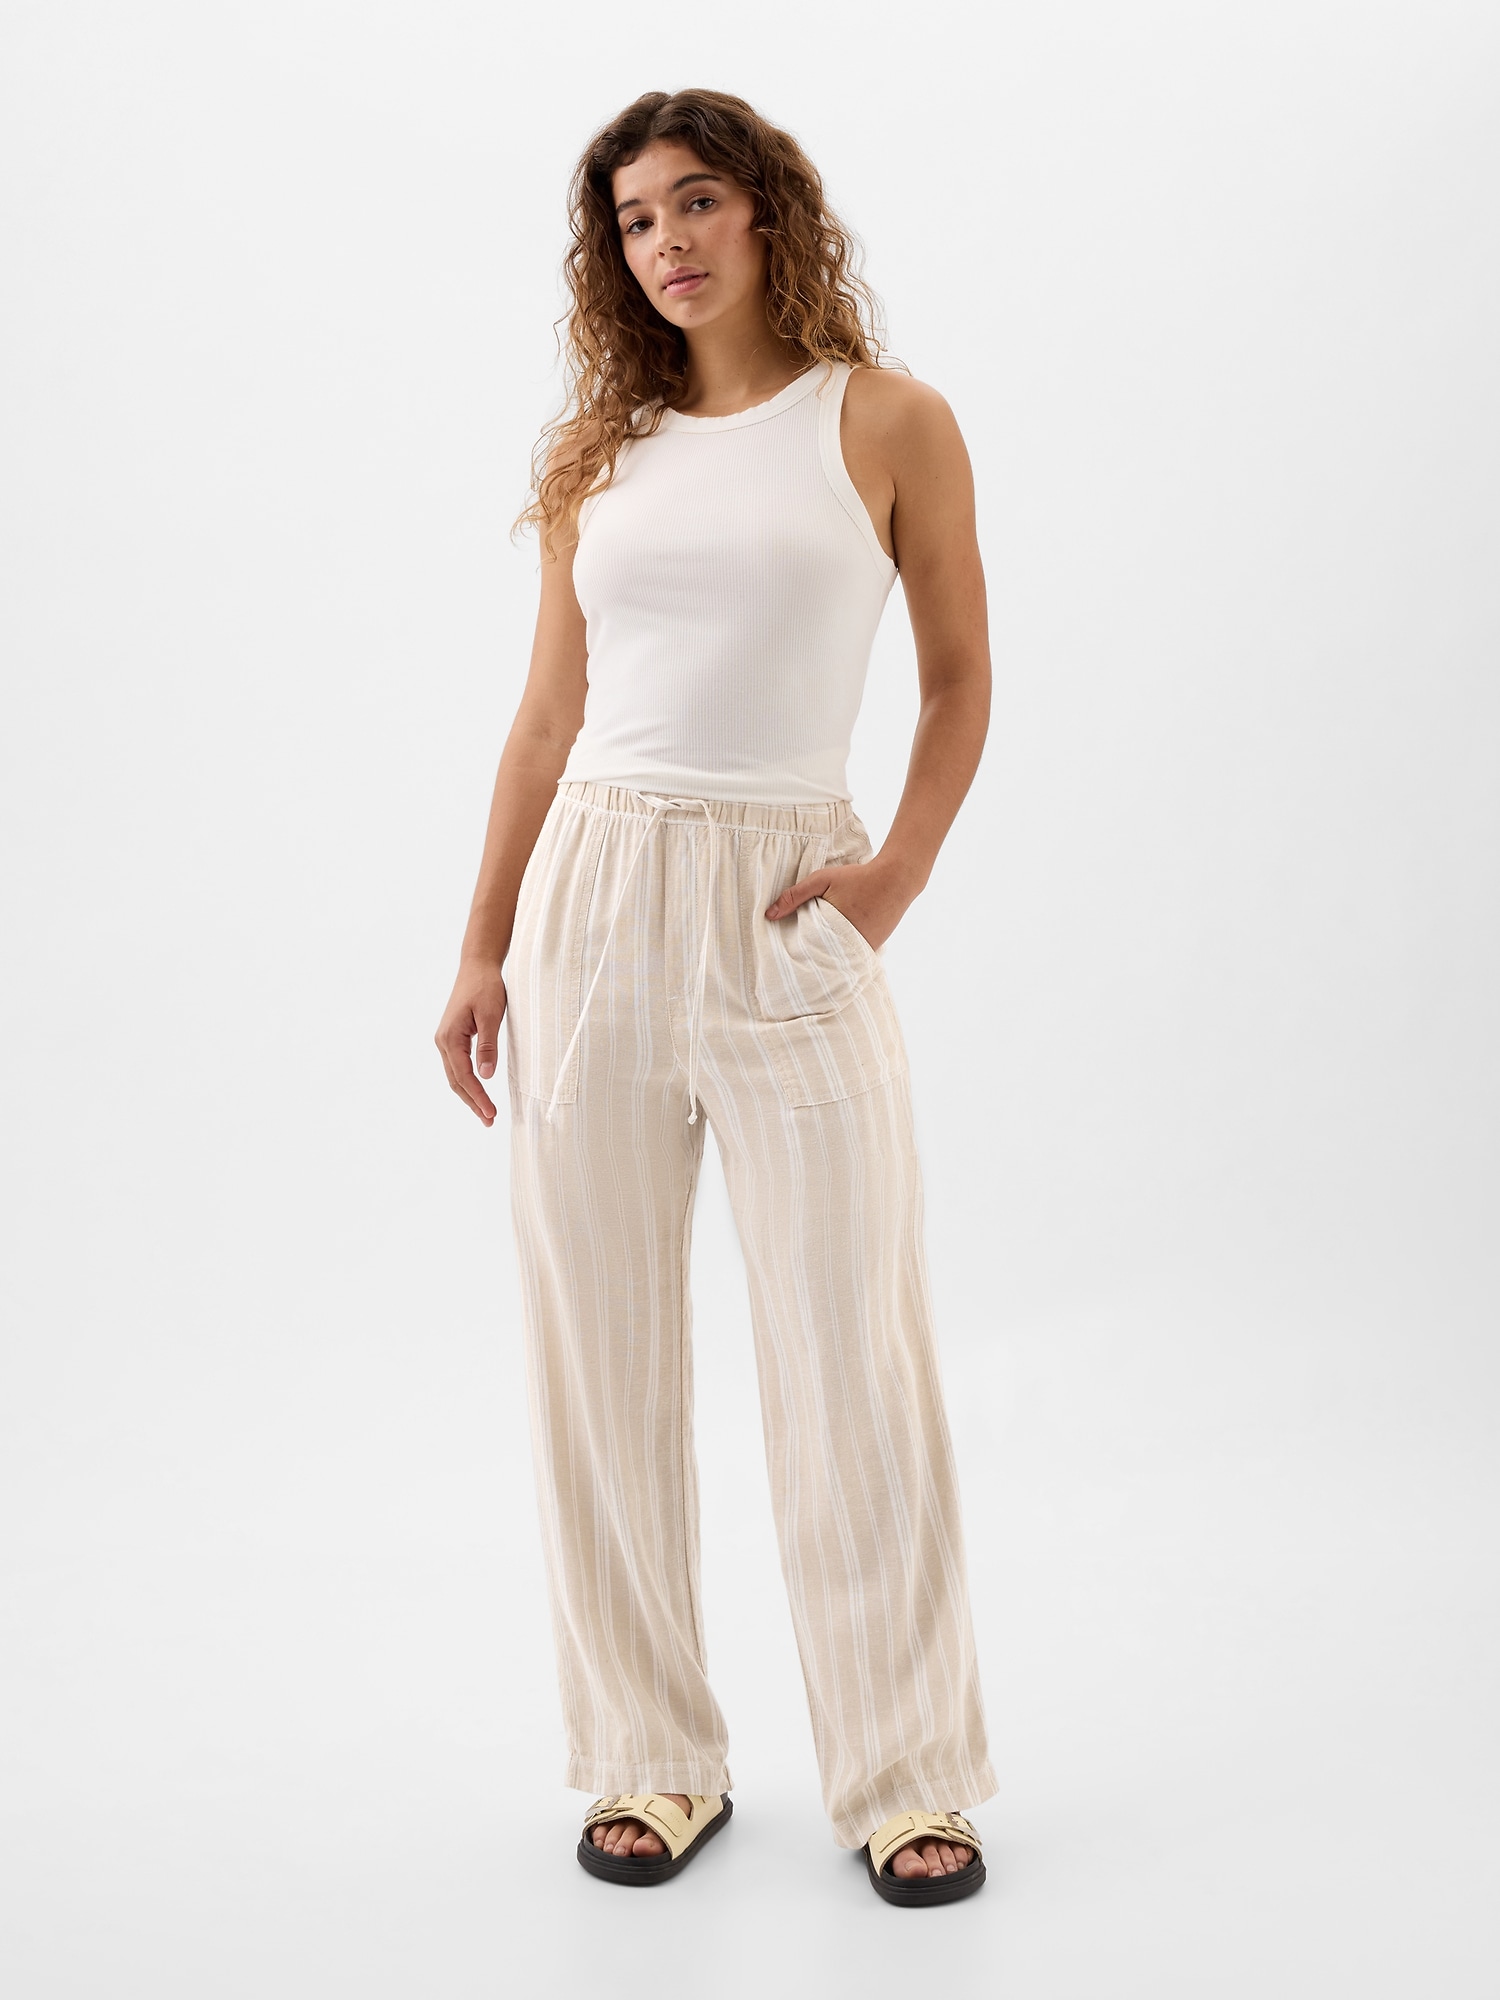 Smooth Fit Pull-On High-Rise Pant *Tall, Women's Pants